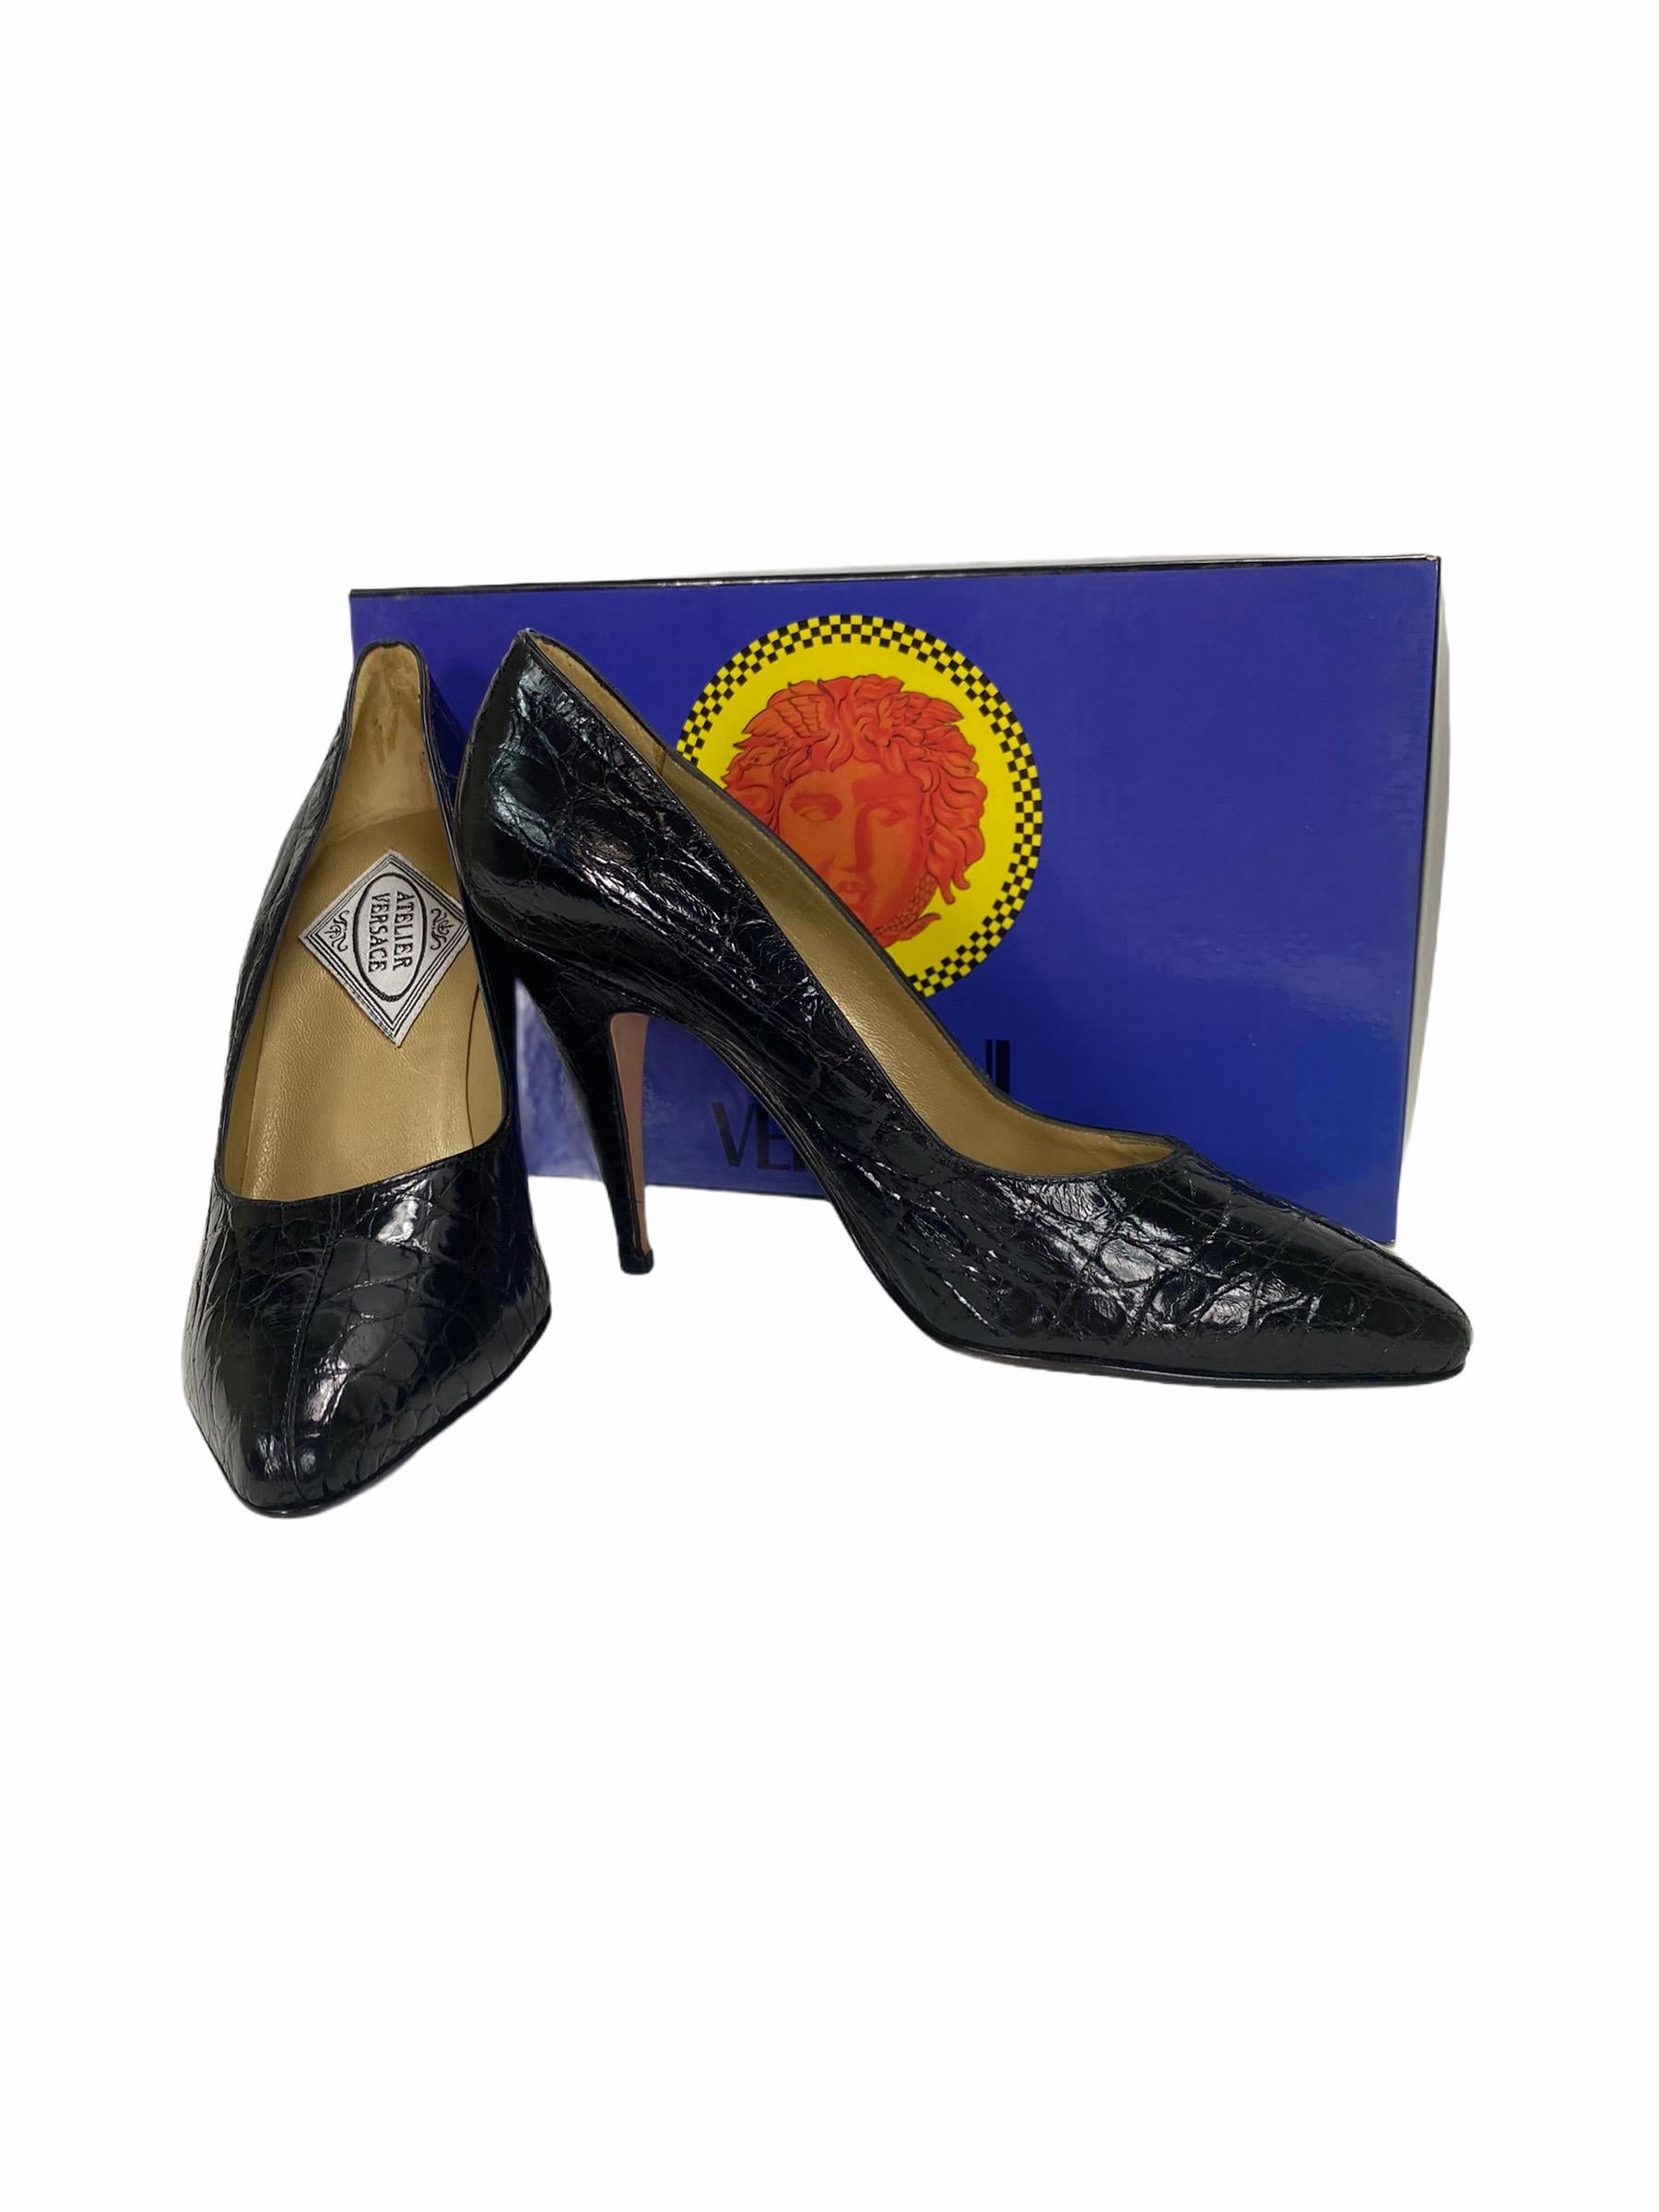 1991 

Extremely Rare Vintage Versace Atelier Crocodile Shoes 

IT Size 37.5

New, in perfect condition with original box!